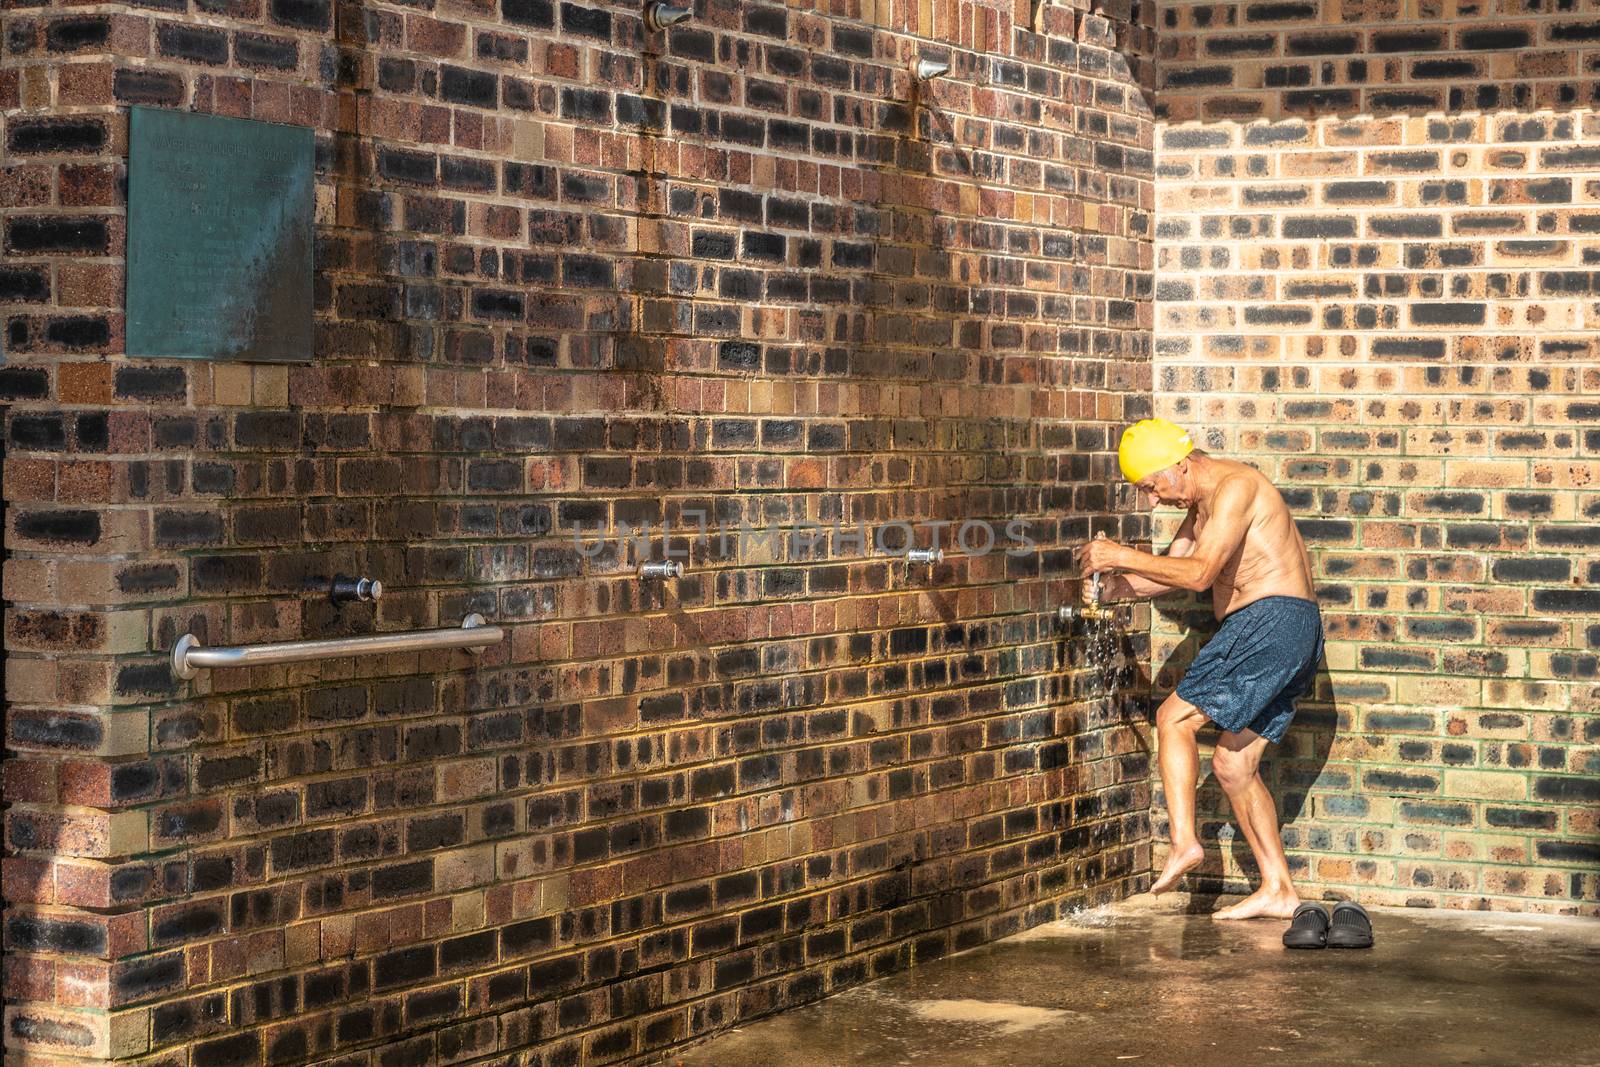 Sydney, Australia - February 11, 2019: Older man with yellow cap rinses feet with water in brown-stone shower facility at Bronte Beach.